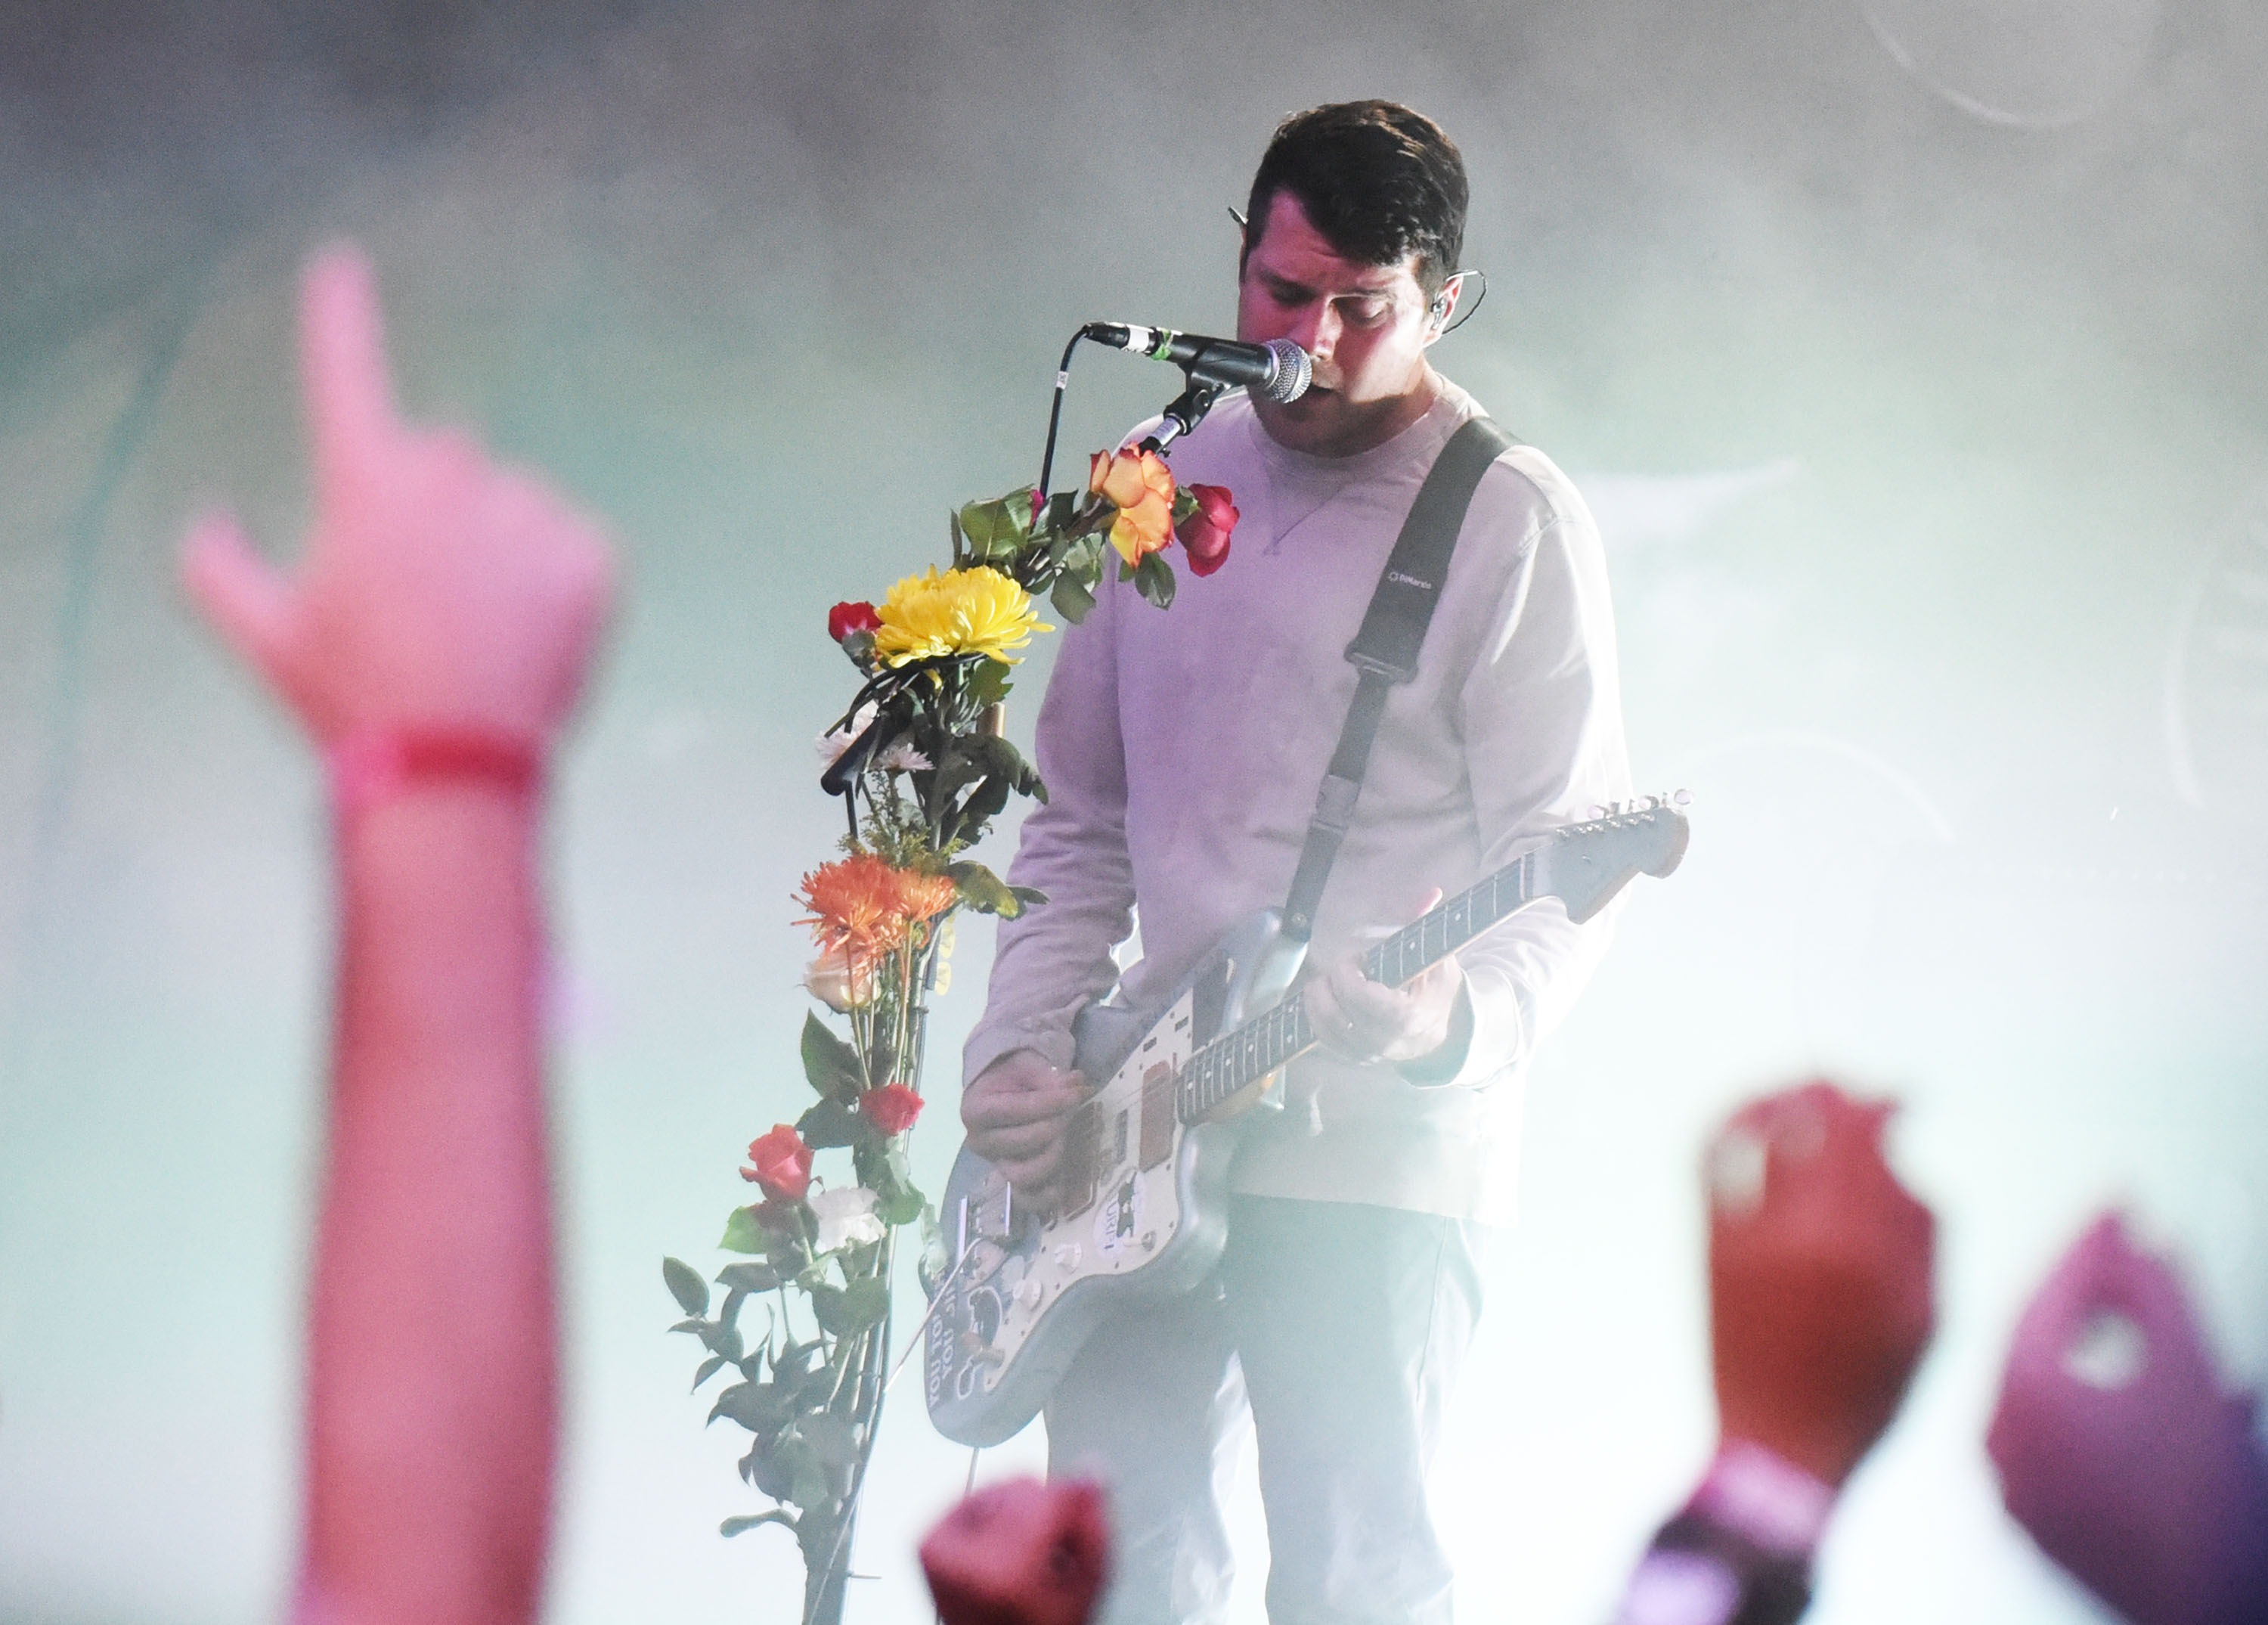 Chicago, Illinois, USA. 1st Aug, 2015. Musician JESSE LACEY of Brand New  performs live in Grant